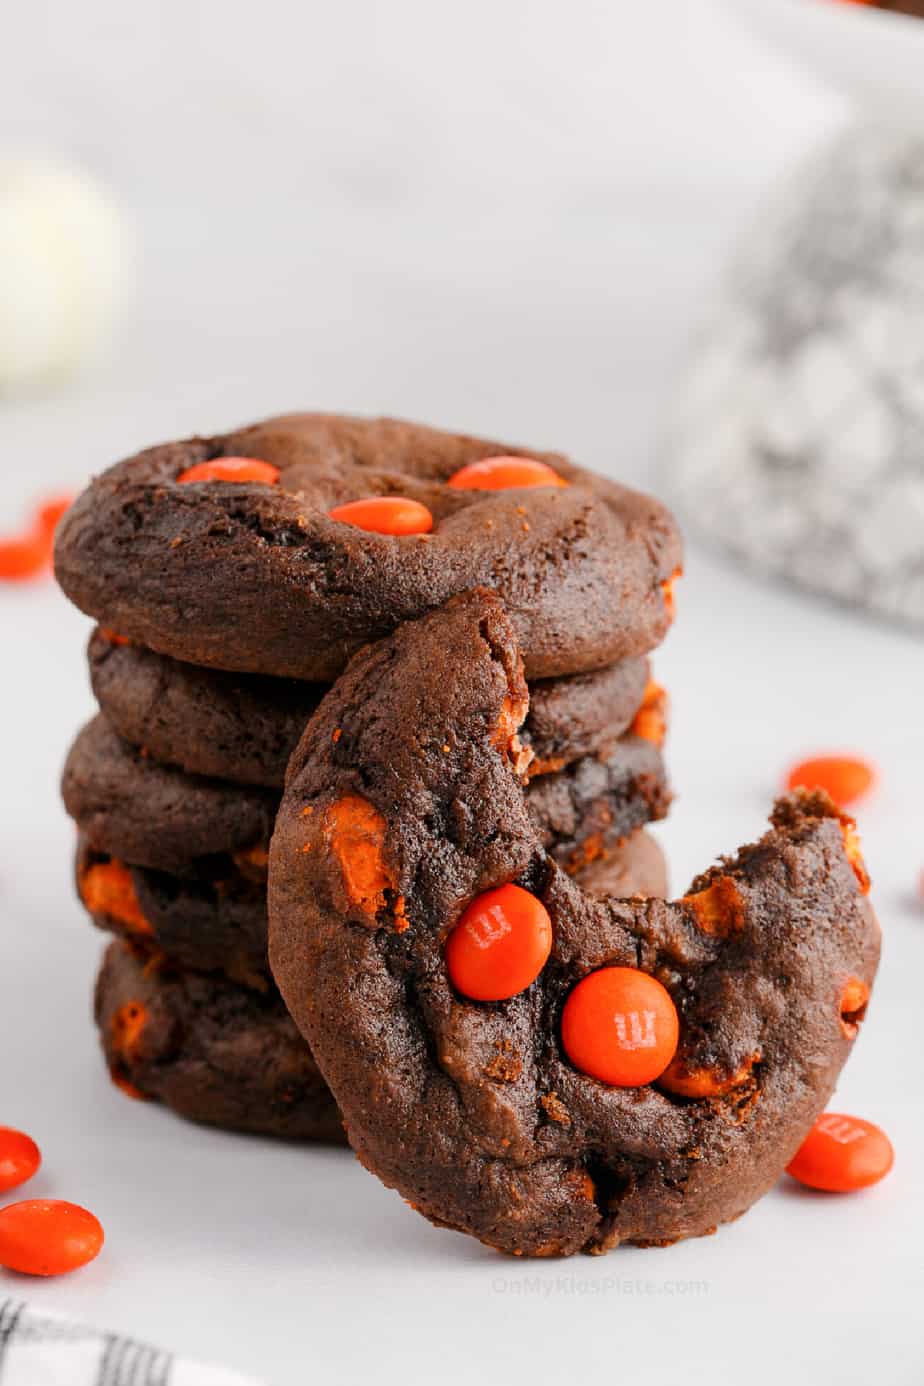 Stack of chocolate cookies with orange candies. One cookie has a bite missing